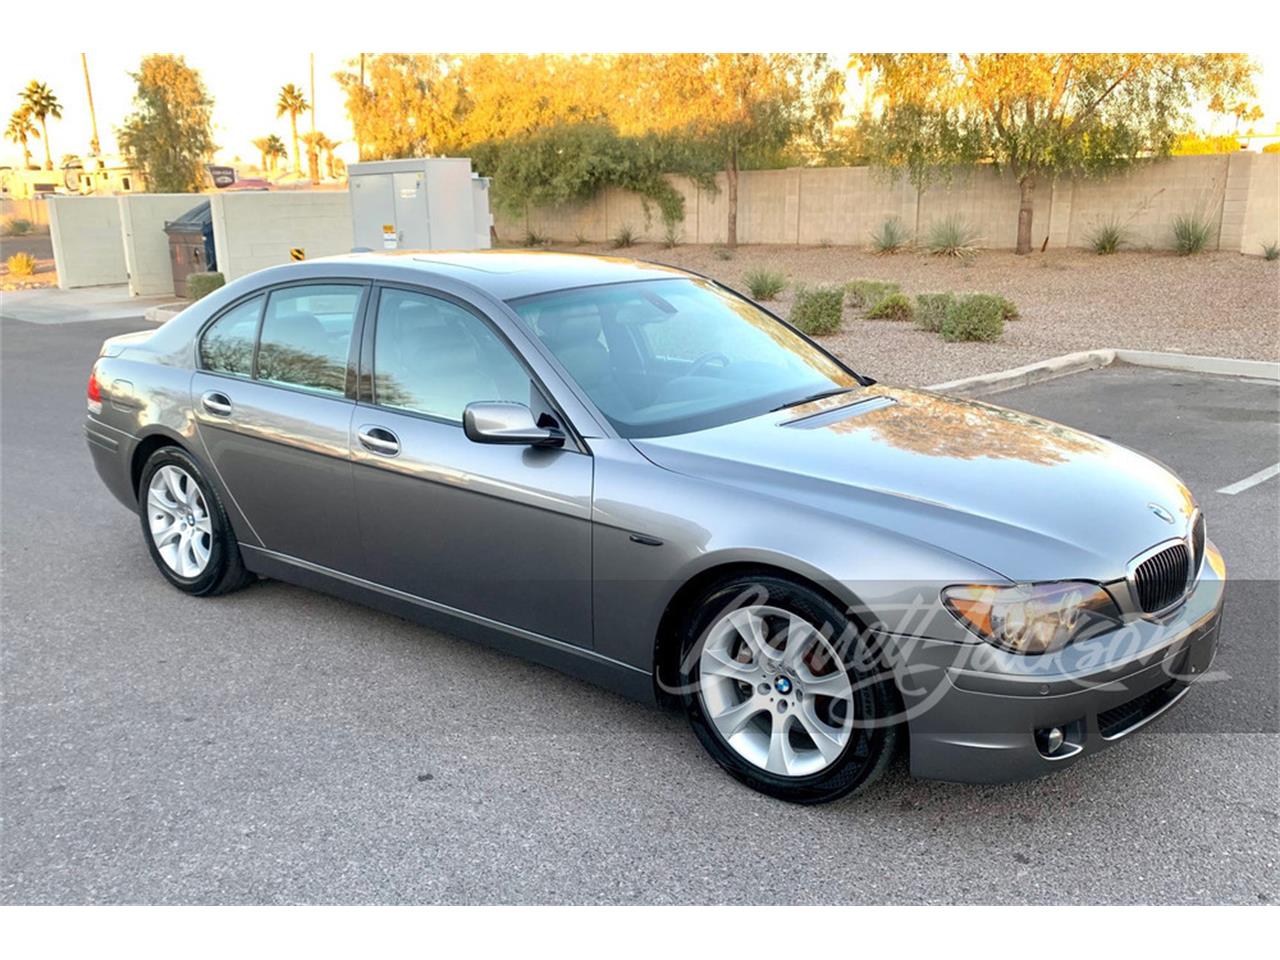 For Sale at Auction: 2008 BMW 7 Series in Scottsdale, Arizona for sale in Scottsdale, AZ